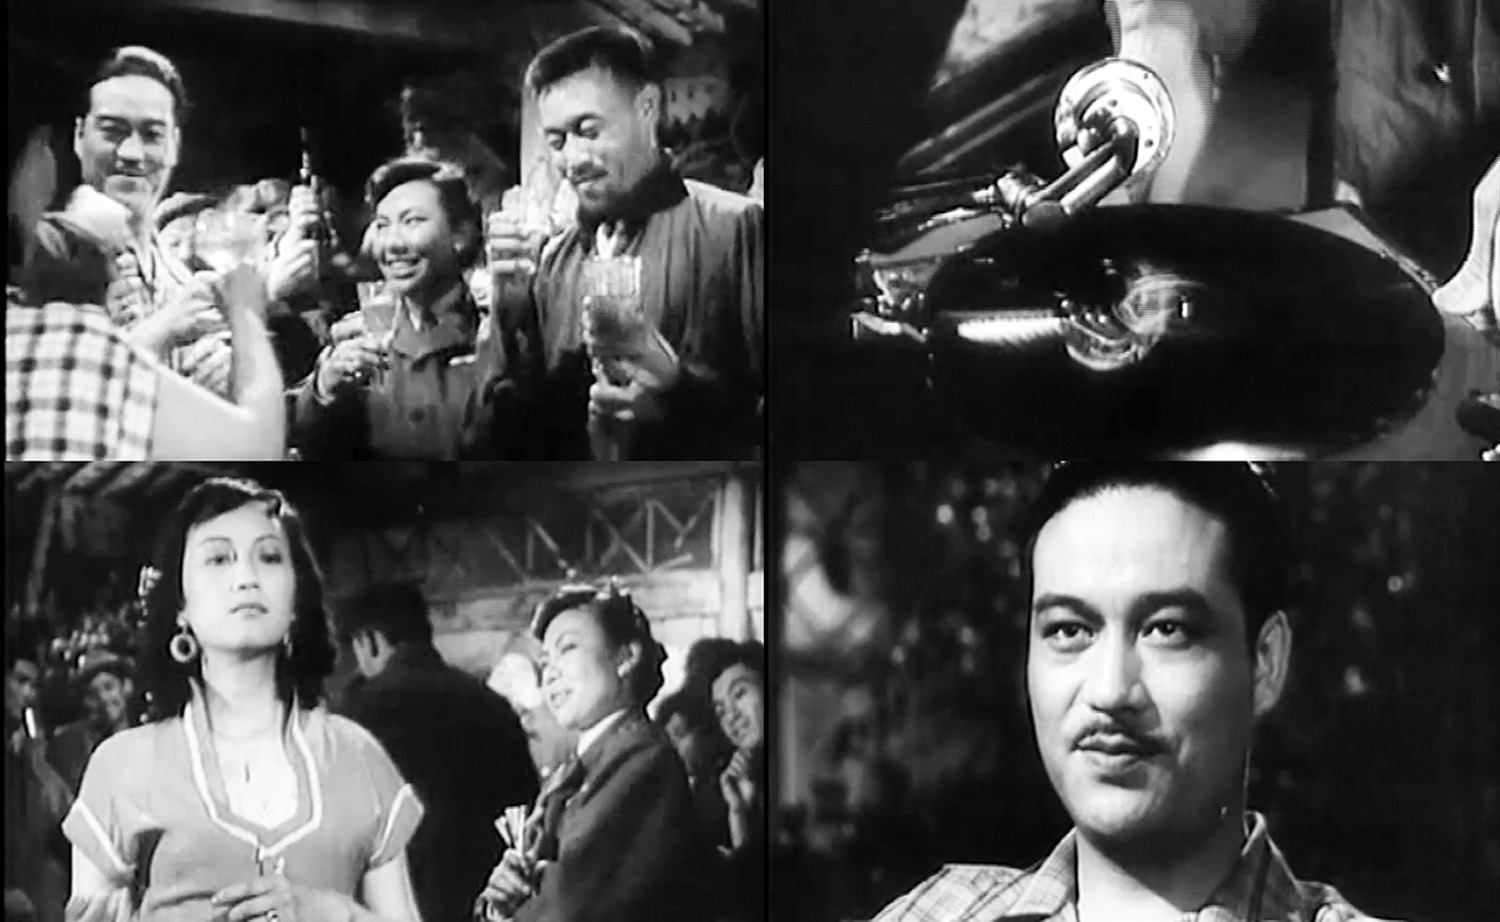 A montage of black and white film stills showing scenes from a social gathering with people drinking, a woman looking pensively, and a man in a party setting, all in a festive atmosphere.